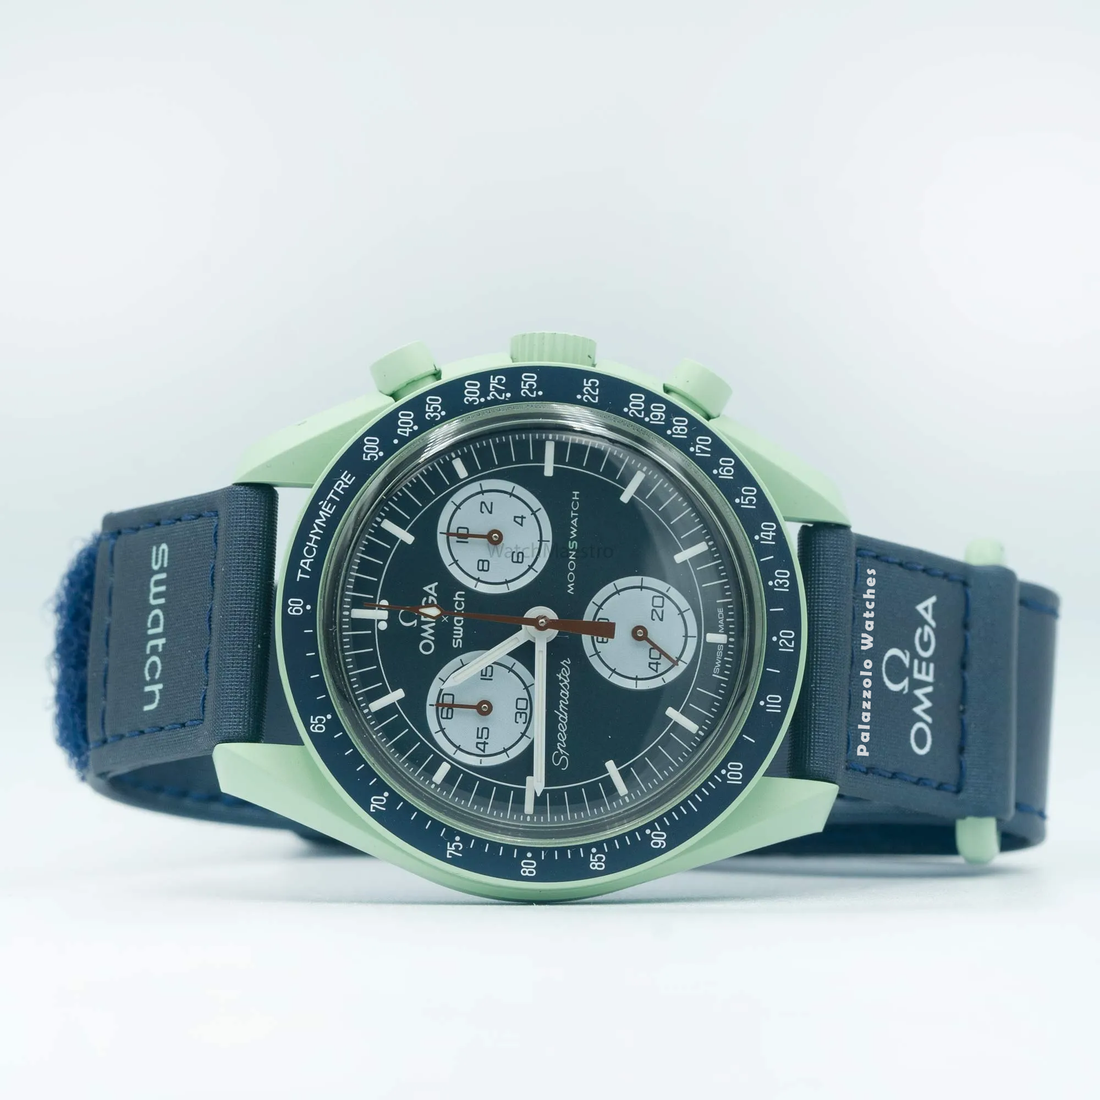 Omega Moonswatch Mission to Earth - Palazzolo Watches